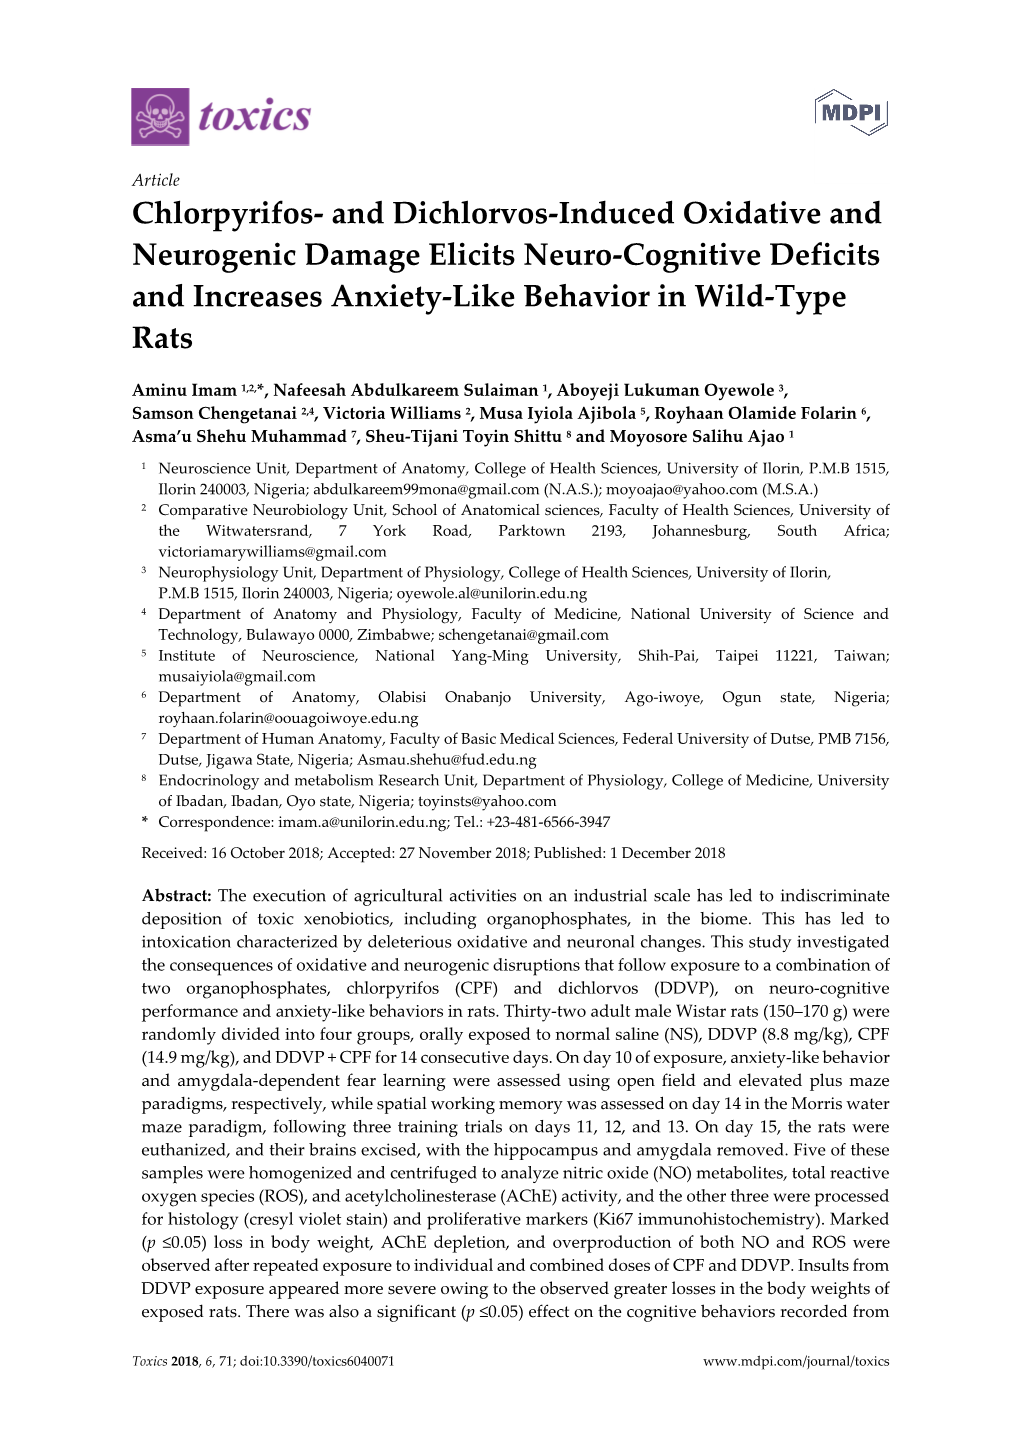 Chlorpyrifos- and Dichlorvos-Induced Oxidative and Neurogenic Damage Elicits Neuro-Cognitive Deficits and Increases Anxiety-Like Behavior in Wild-Type Rats